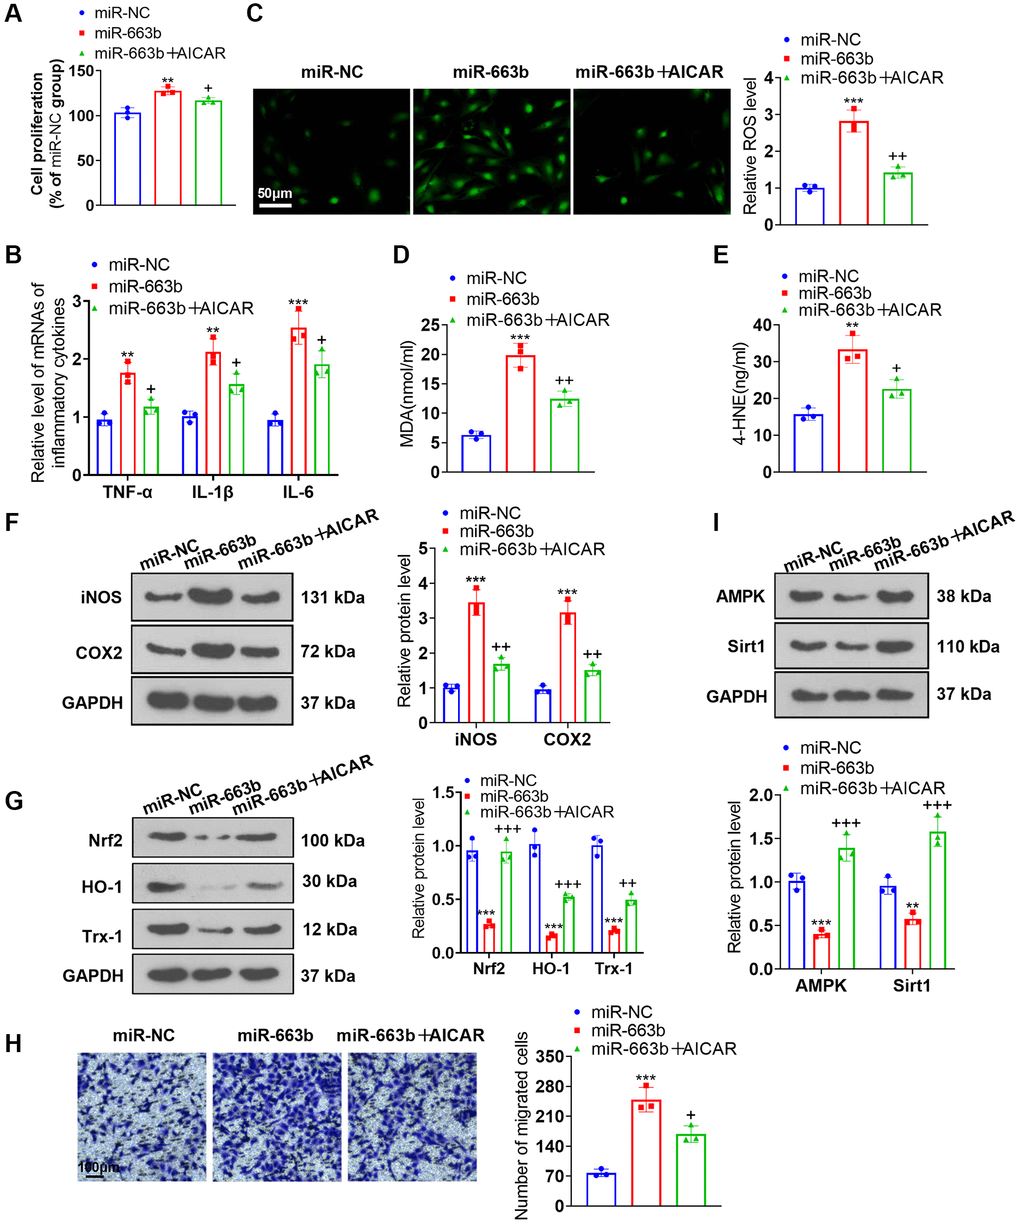 AMPK activation alleviated the effects of miR-663b overexpression on PASMCs. miR-663b mimics were transfected into PASMCs, with the AMPK activator AICAR applied for treatment. (A) CCK8 assay was conducted for examining cell proliferation. (B) RT-PCR measured TNF-α, IL-1β, and IL-6 profiles in PASMCs. (C) Cell immunofluorescence determined ROS levels in PASMCs. (D, E) Colorimetry confirmed MDA and 4-HNE contents in PASMCs. (F) Western blot verified iNOS and COX2 levels in PASMCs. (G) Western blot checked Nrf2, HO-1 and Trx-1 expressions in PASMCs. (H) Transwell monitored PASMC migration. (I) Western blot figured out the profiles of AMPK and Sirt1 in PASMCs. N = 3. **P ***P +P ++P +++P 